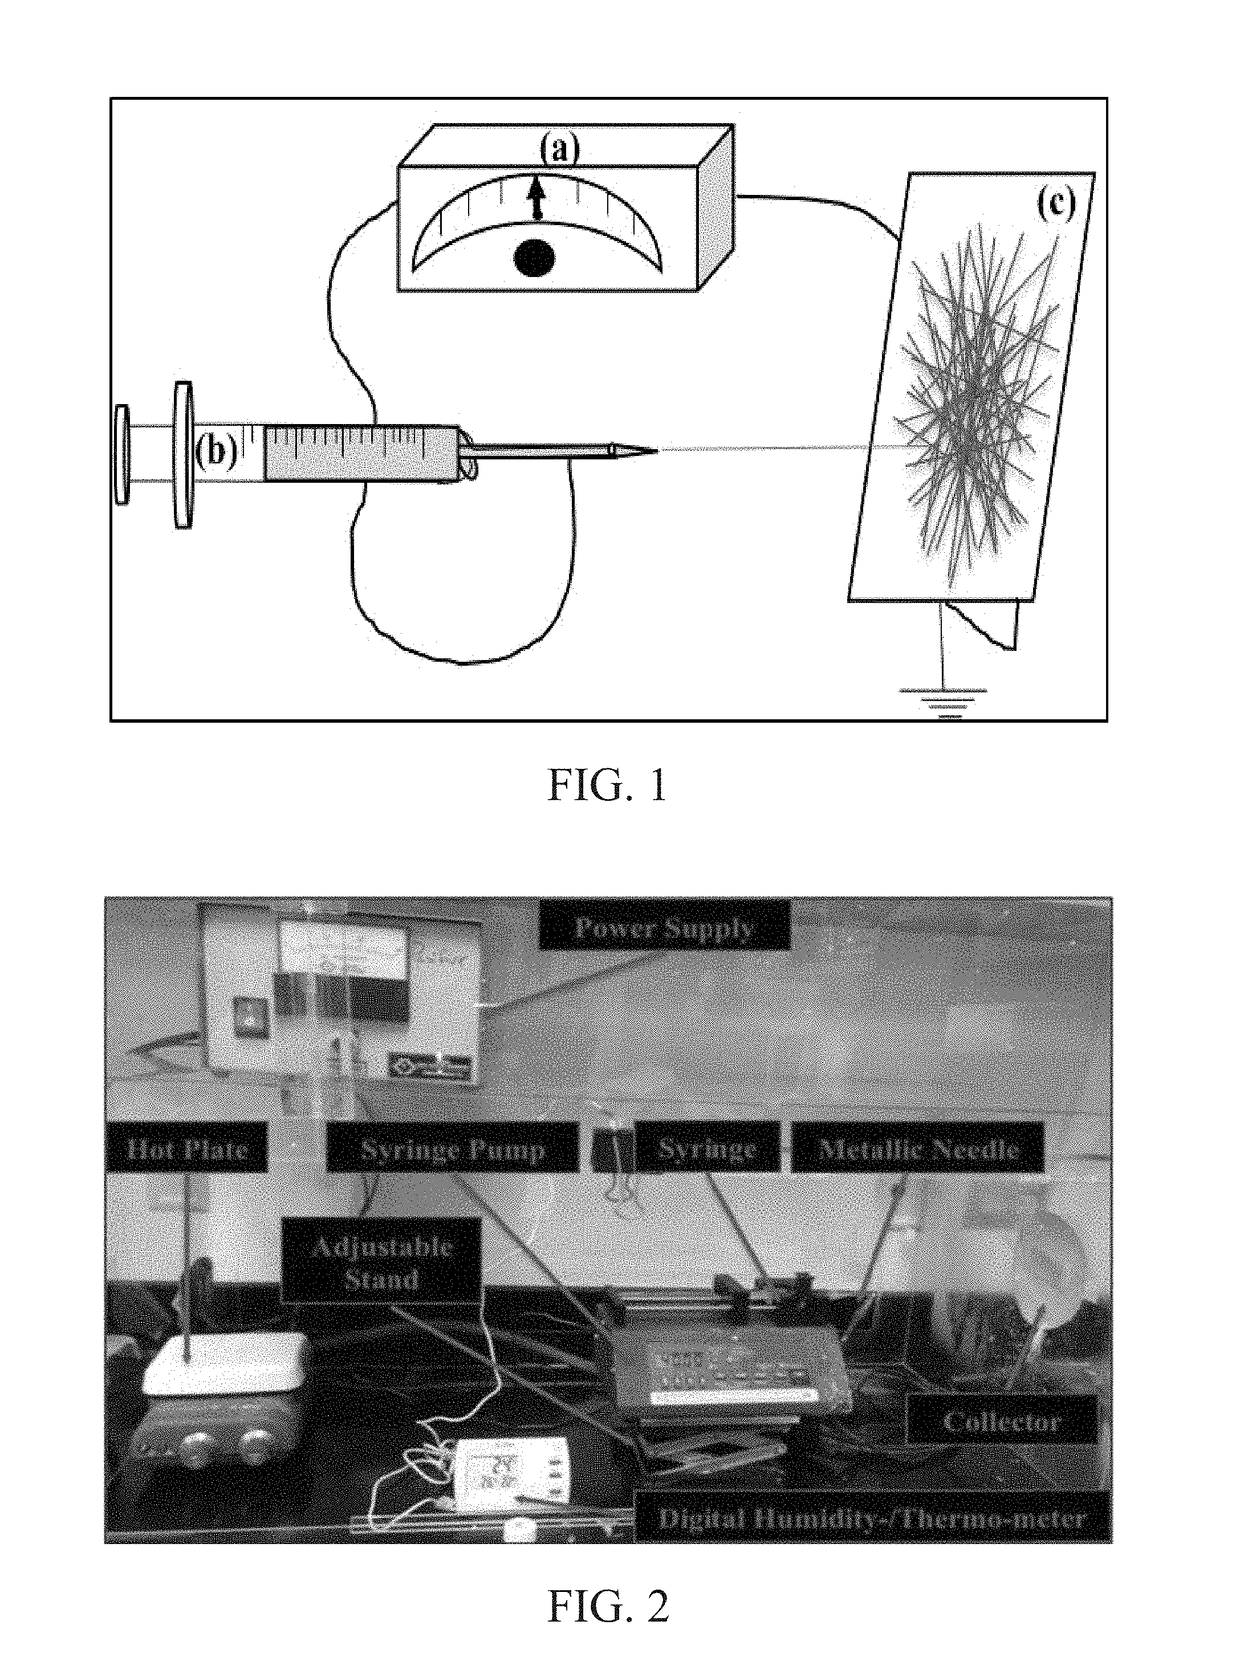 Highly selective, ultralight, electro-spun filter media for separating oil-water mixtures